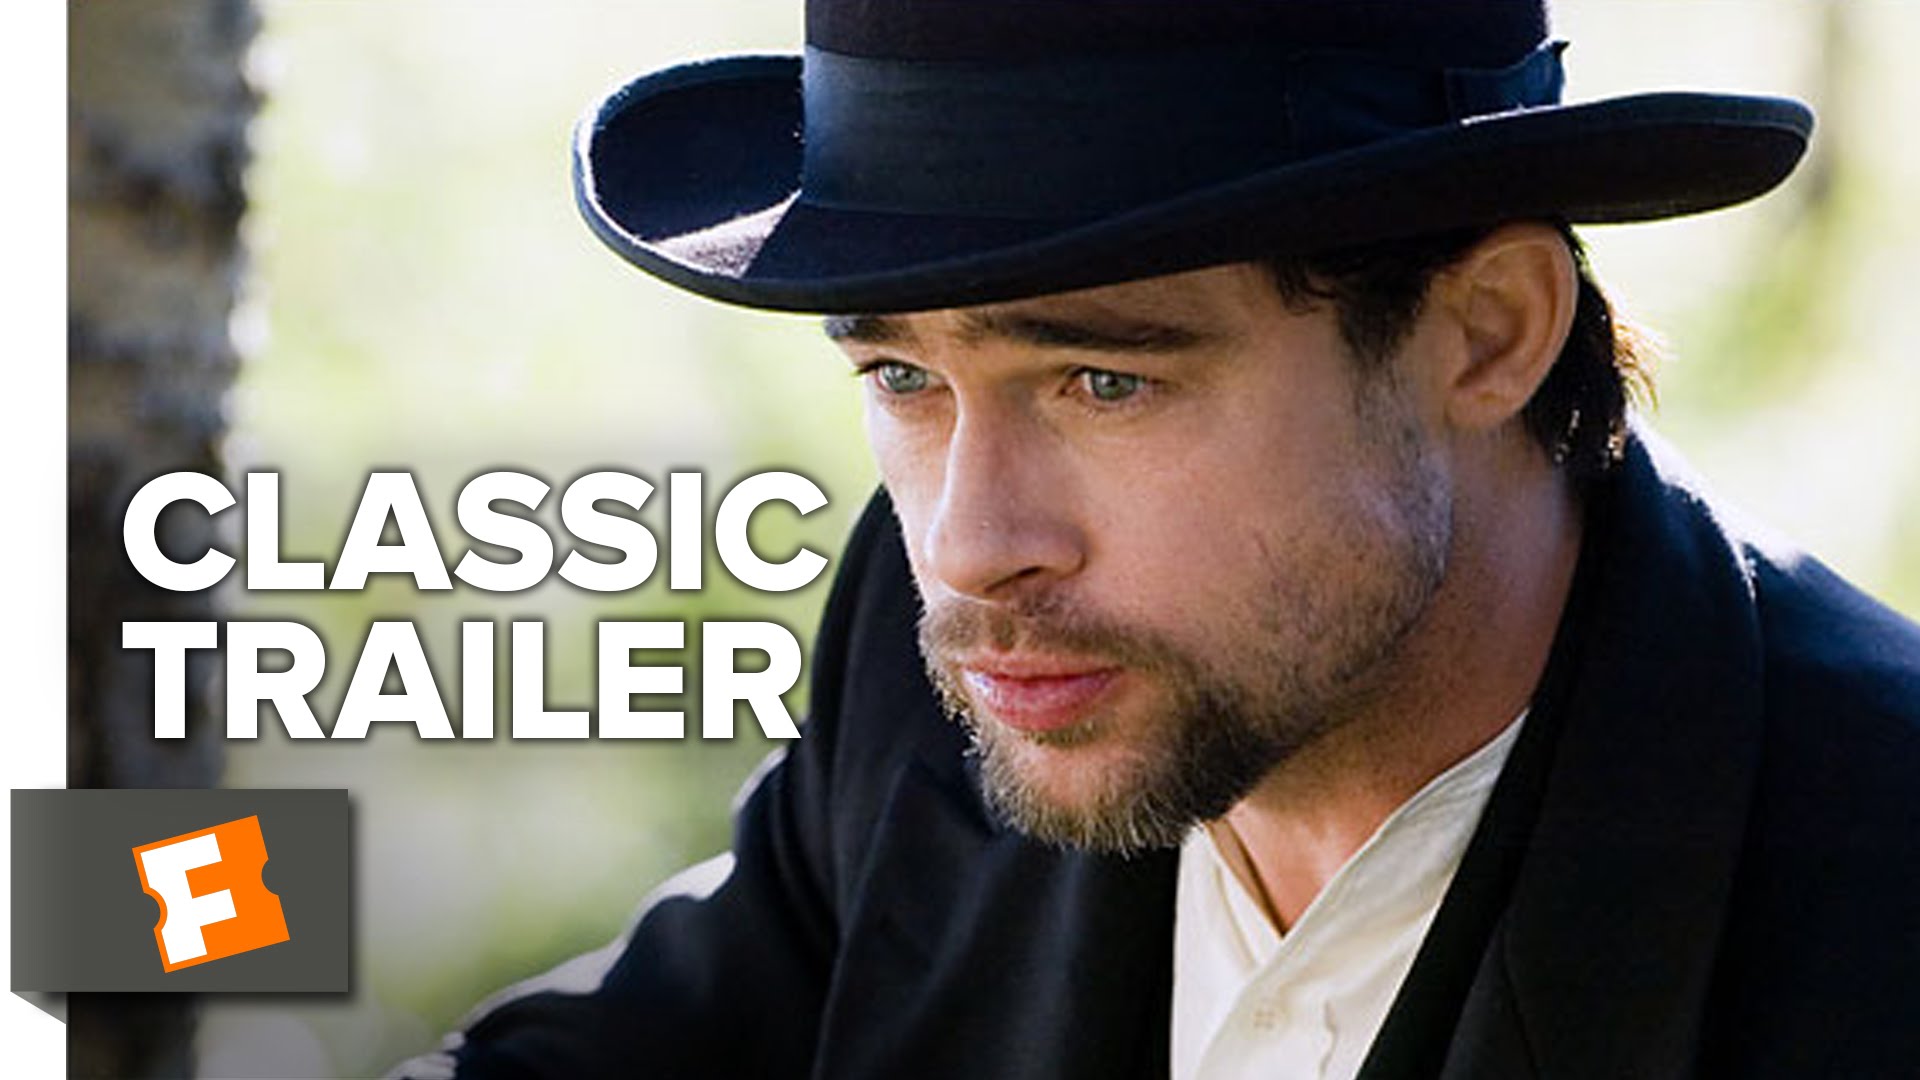 High Resolution Wallpaper | The Assassination Of Jesse James By The Coward Robert Ford 1920x1080 px